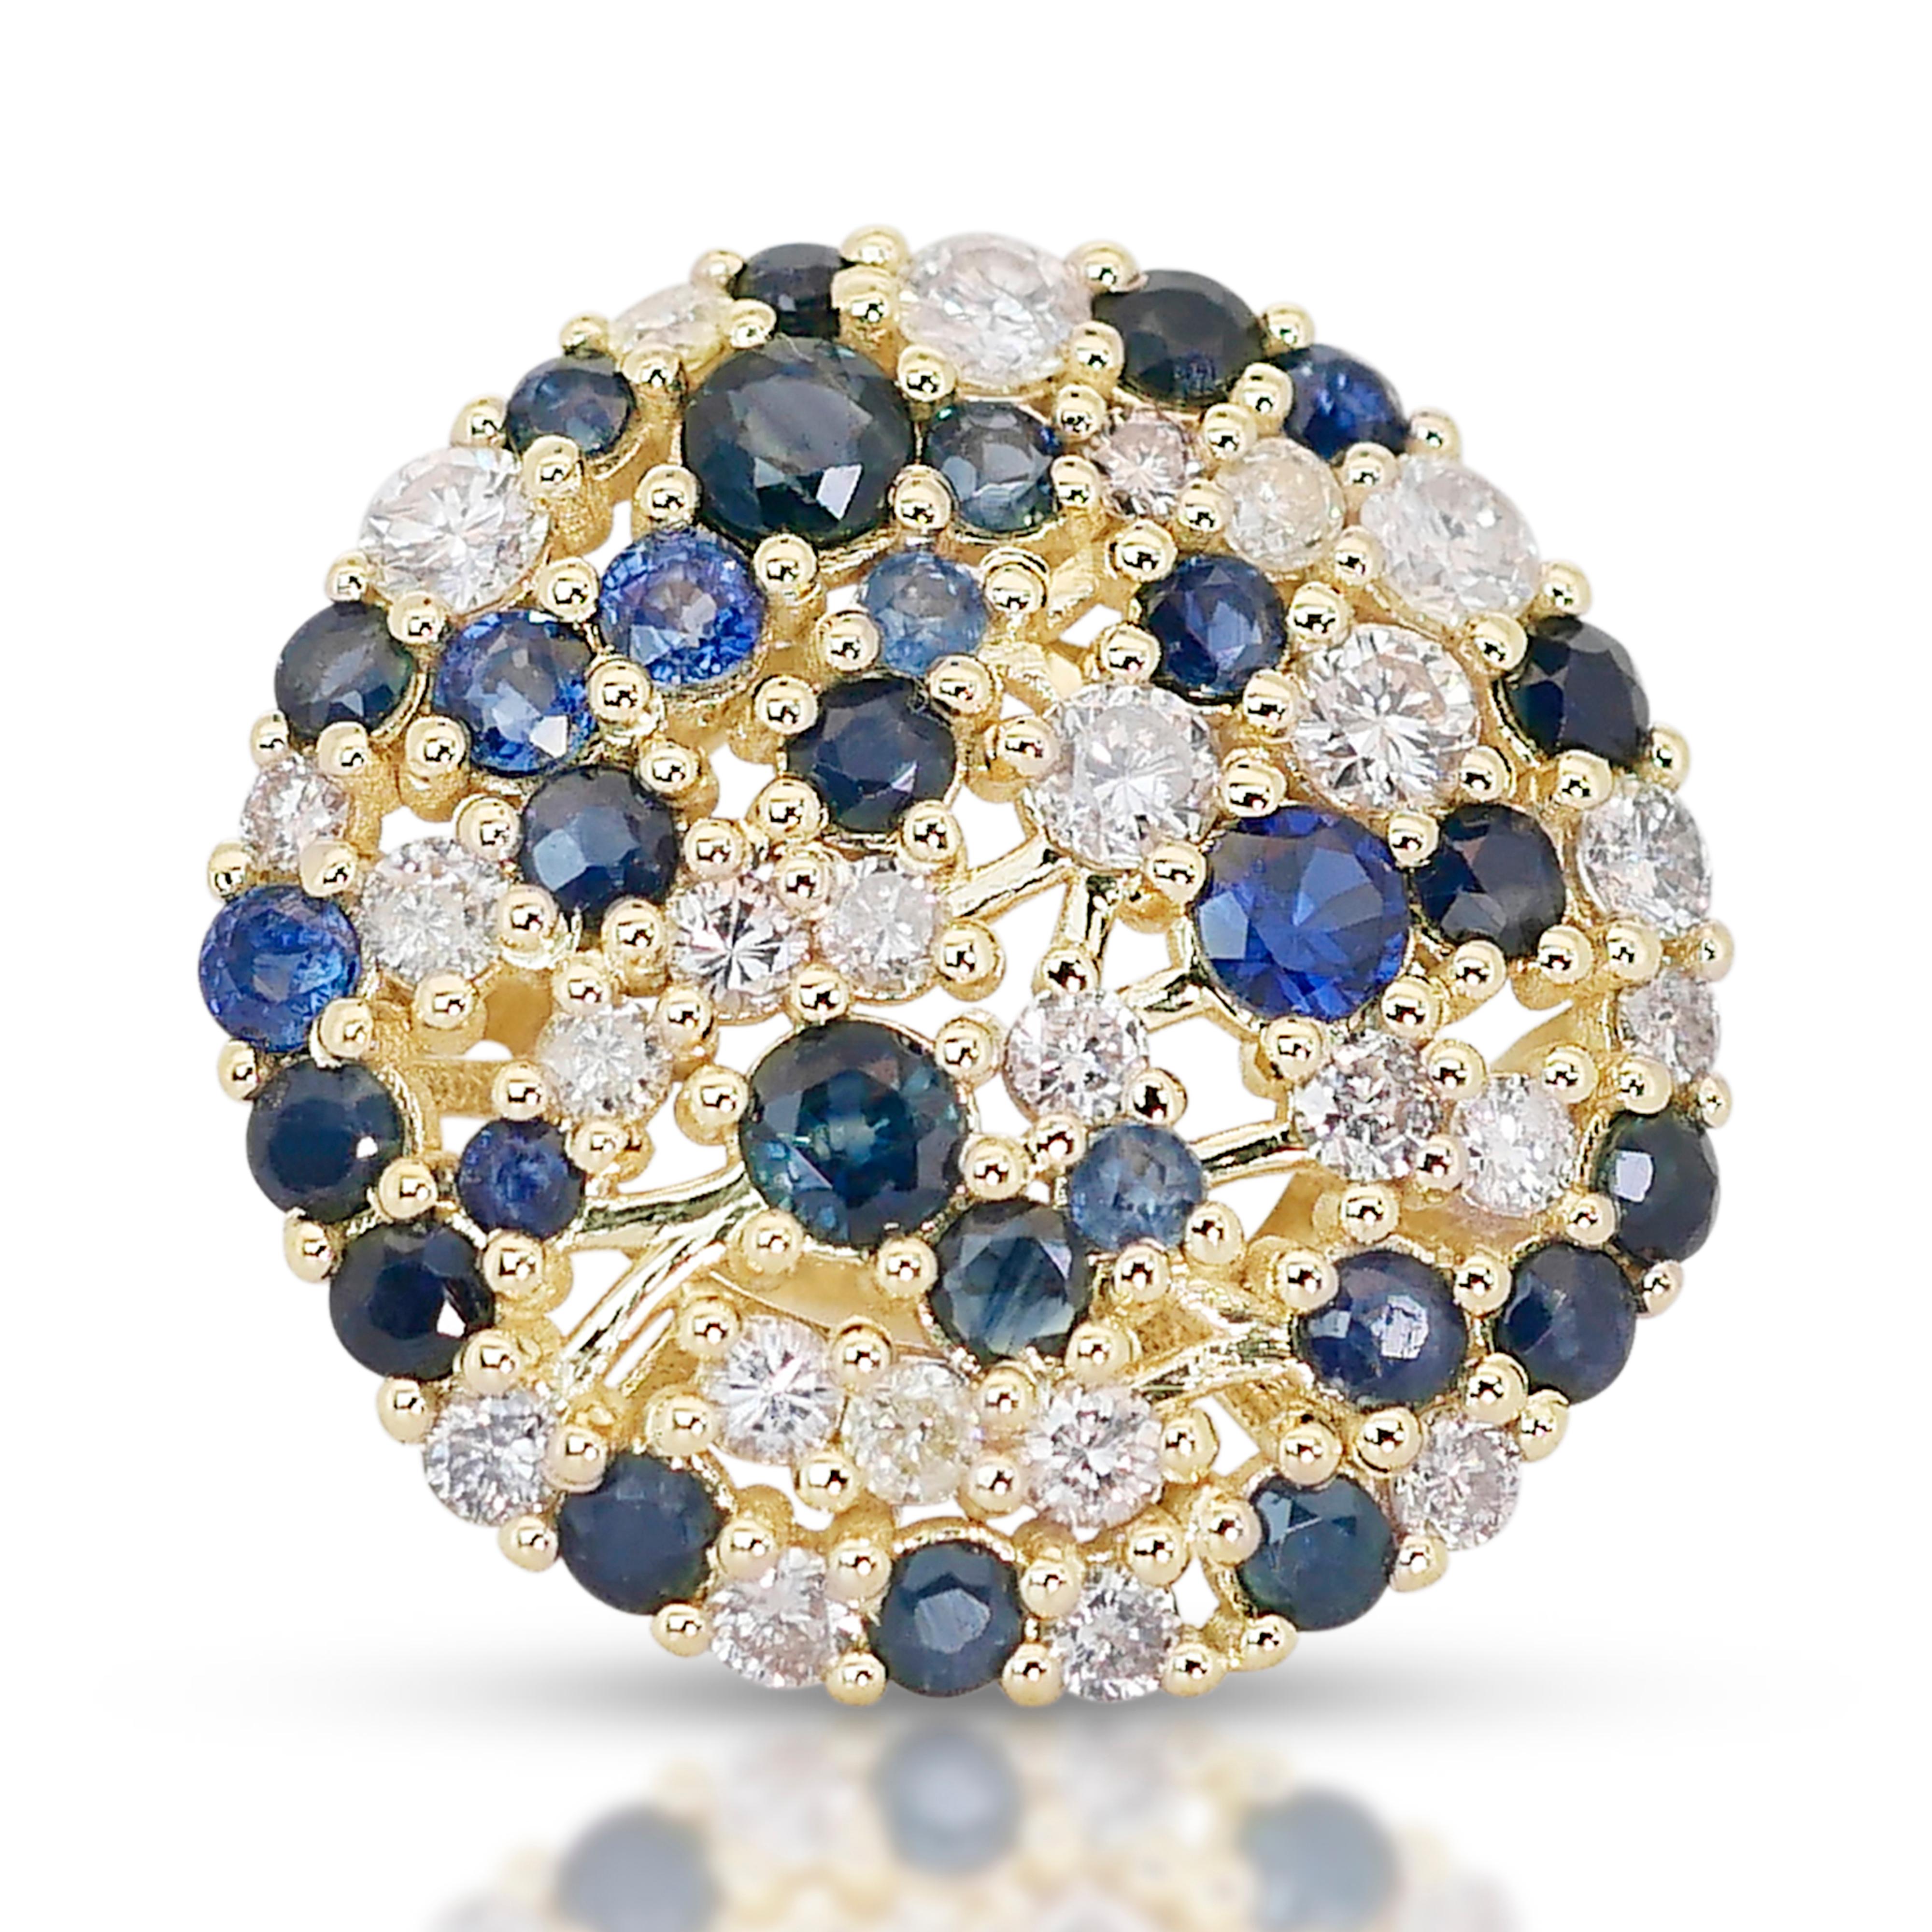 Brilliant Cut Stunning 14k Yellow Gold Sapphire and Diamond Halo Ring w/4.39 ct -AIG Certified For Sale